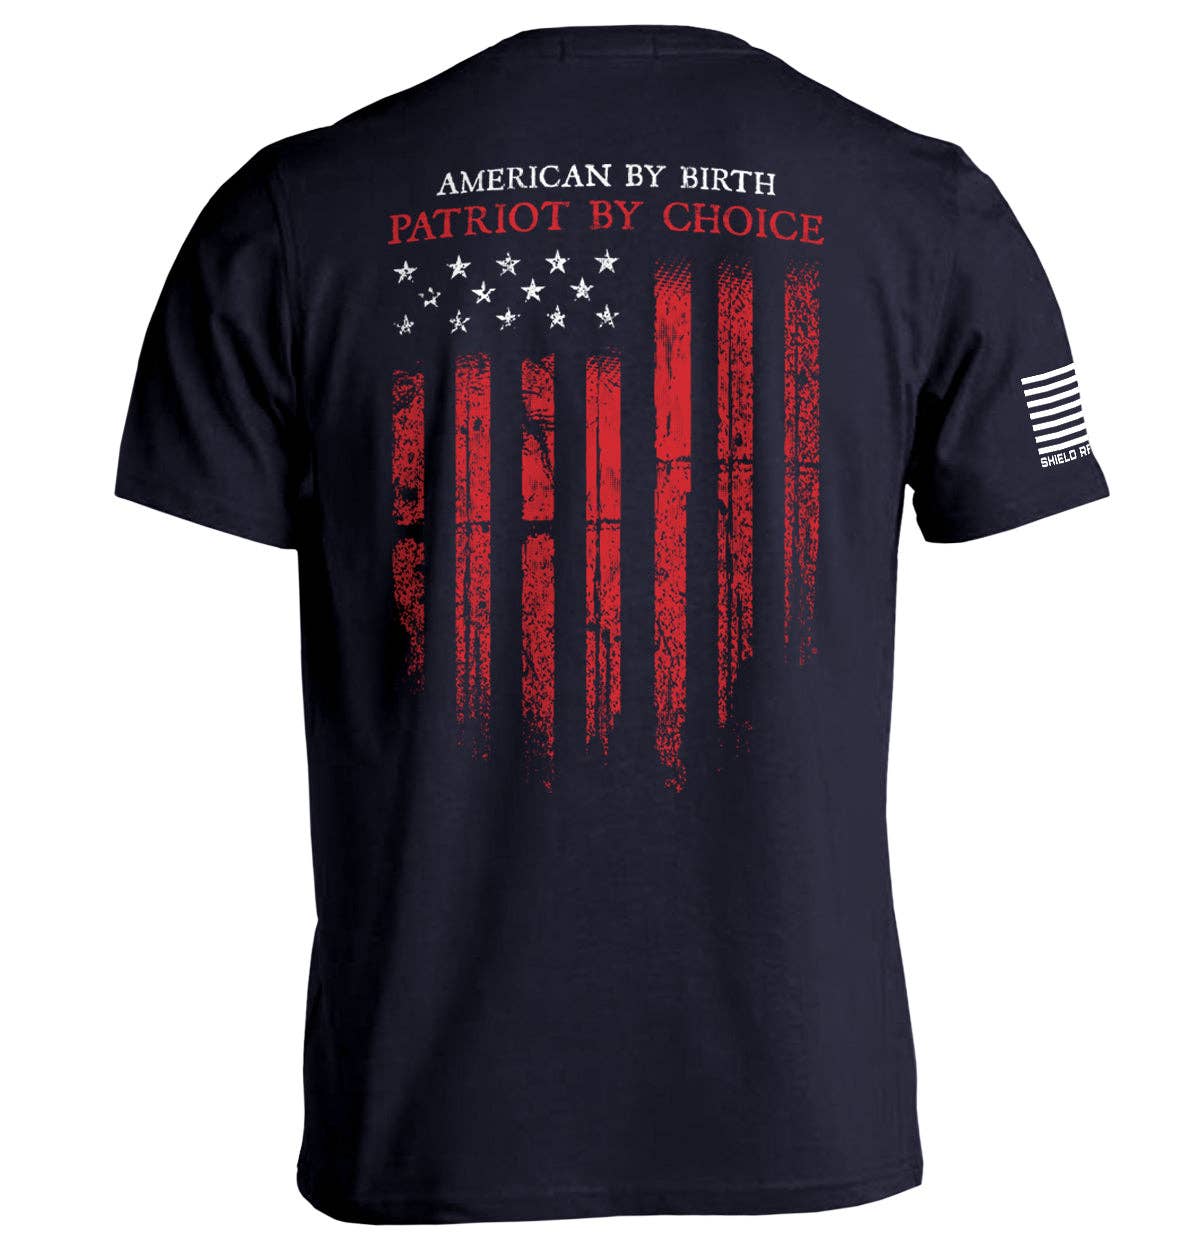 American by Birth Tee